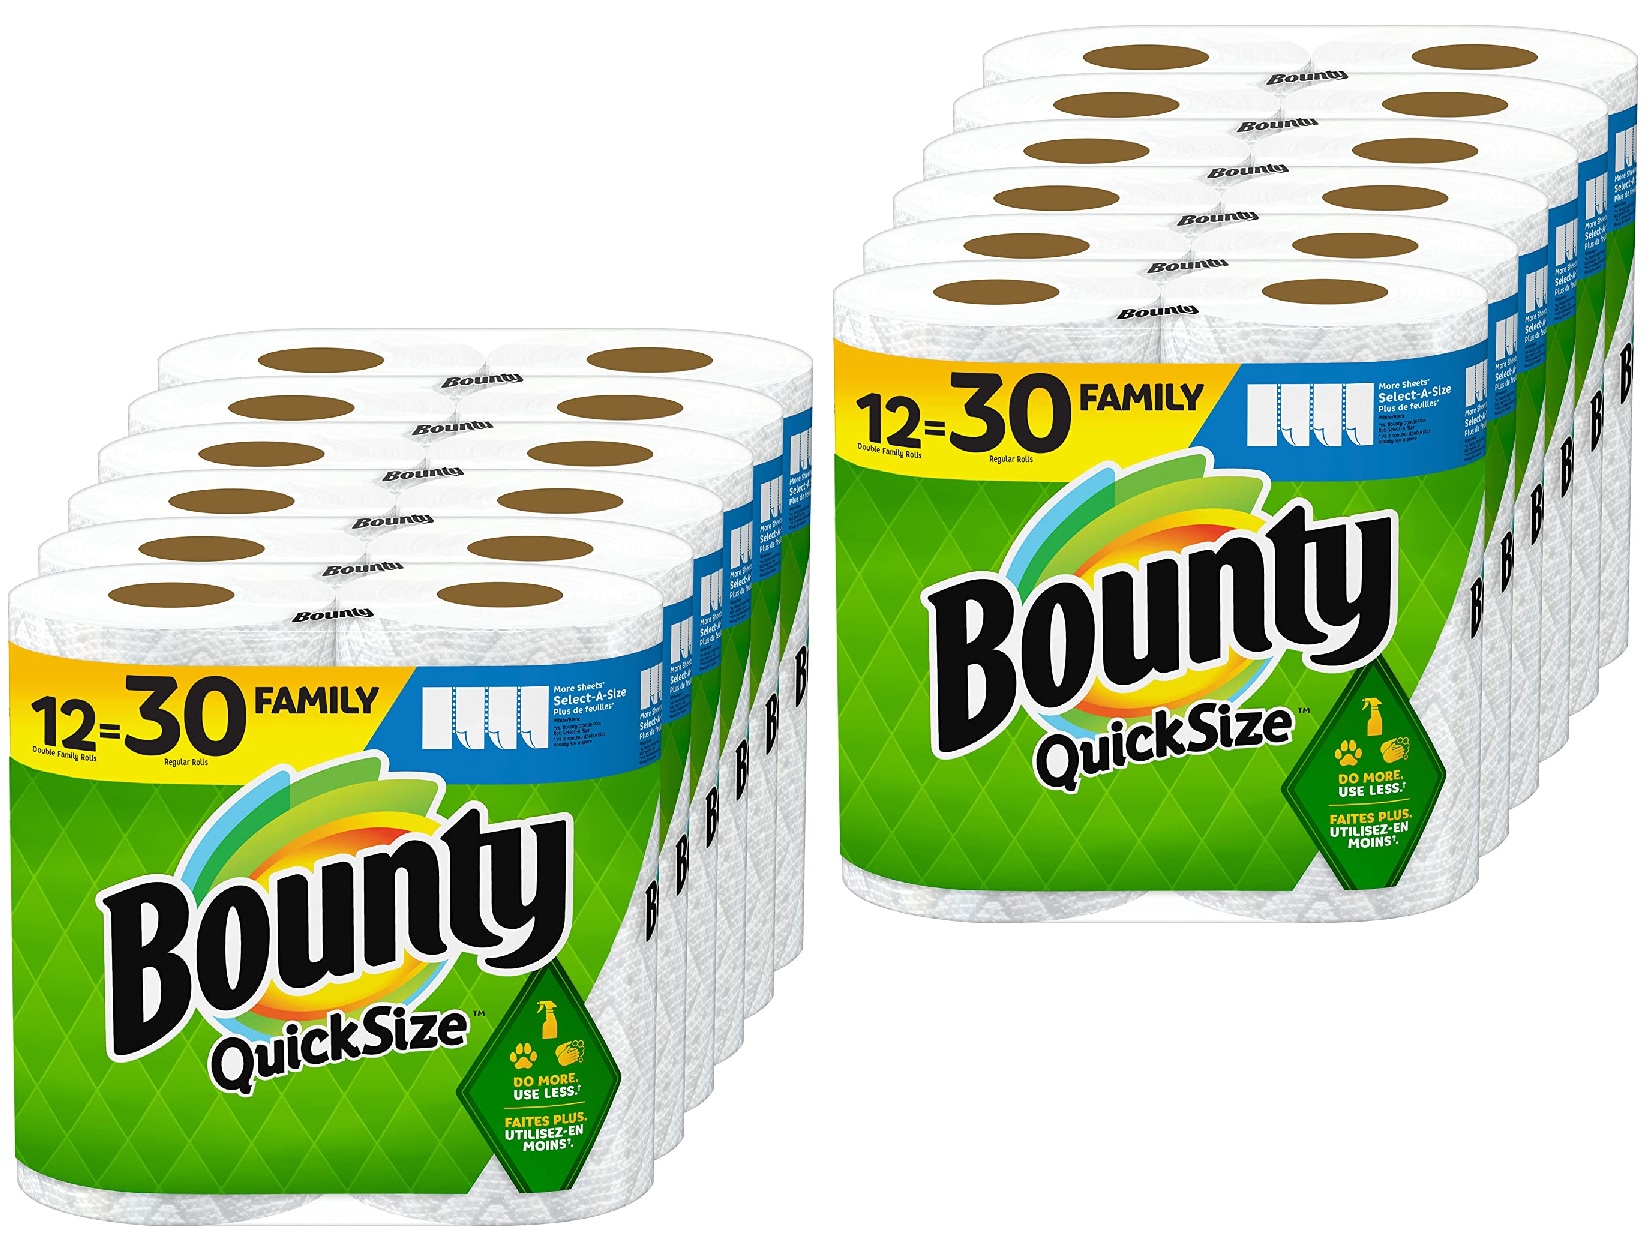 12-Ct Bounty Paper Towels (Family Rolls) + $15 Amazon Credit 2 for $46.25 or 24-Ct Charmin Ultra Soft Family Mega Rolls TP + $15 Amazon Credit 2 for $48.45 after $15 Rebate w/ S&S